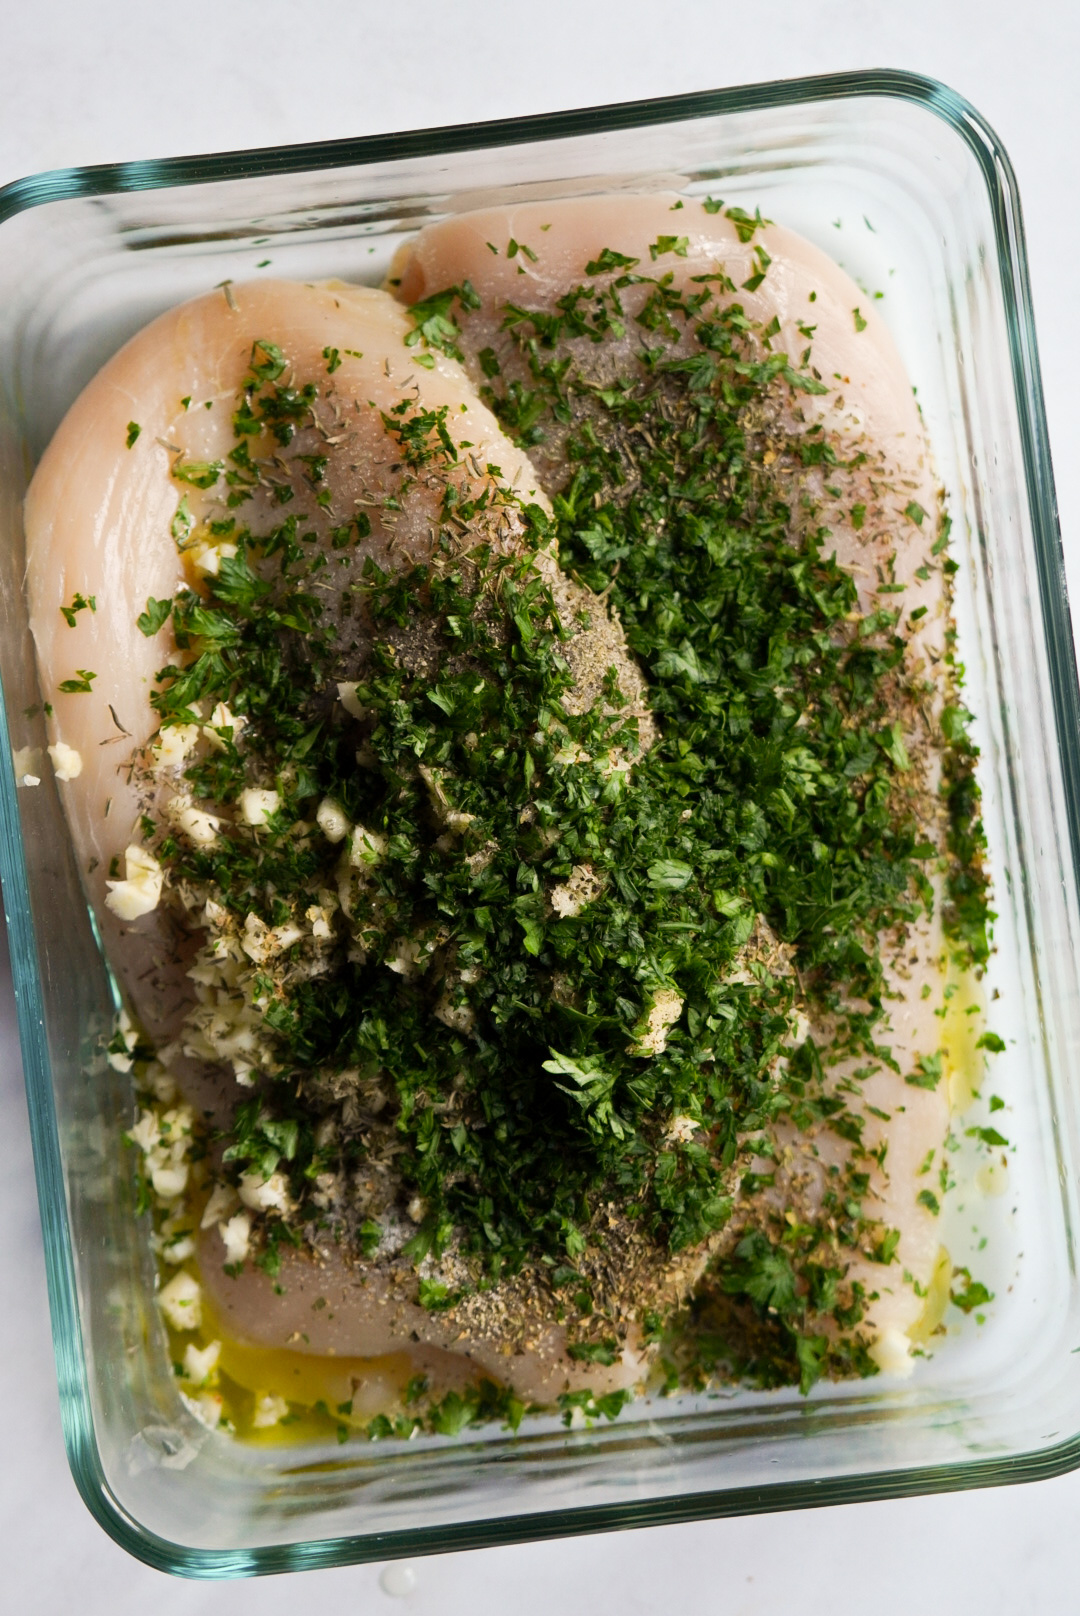 chicken breasts covered with the marinade ingredients - fresh herbs, olive oil, lemon juice